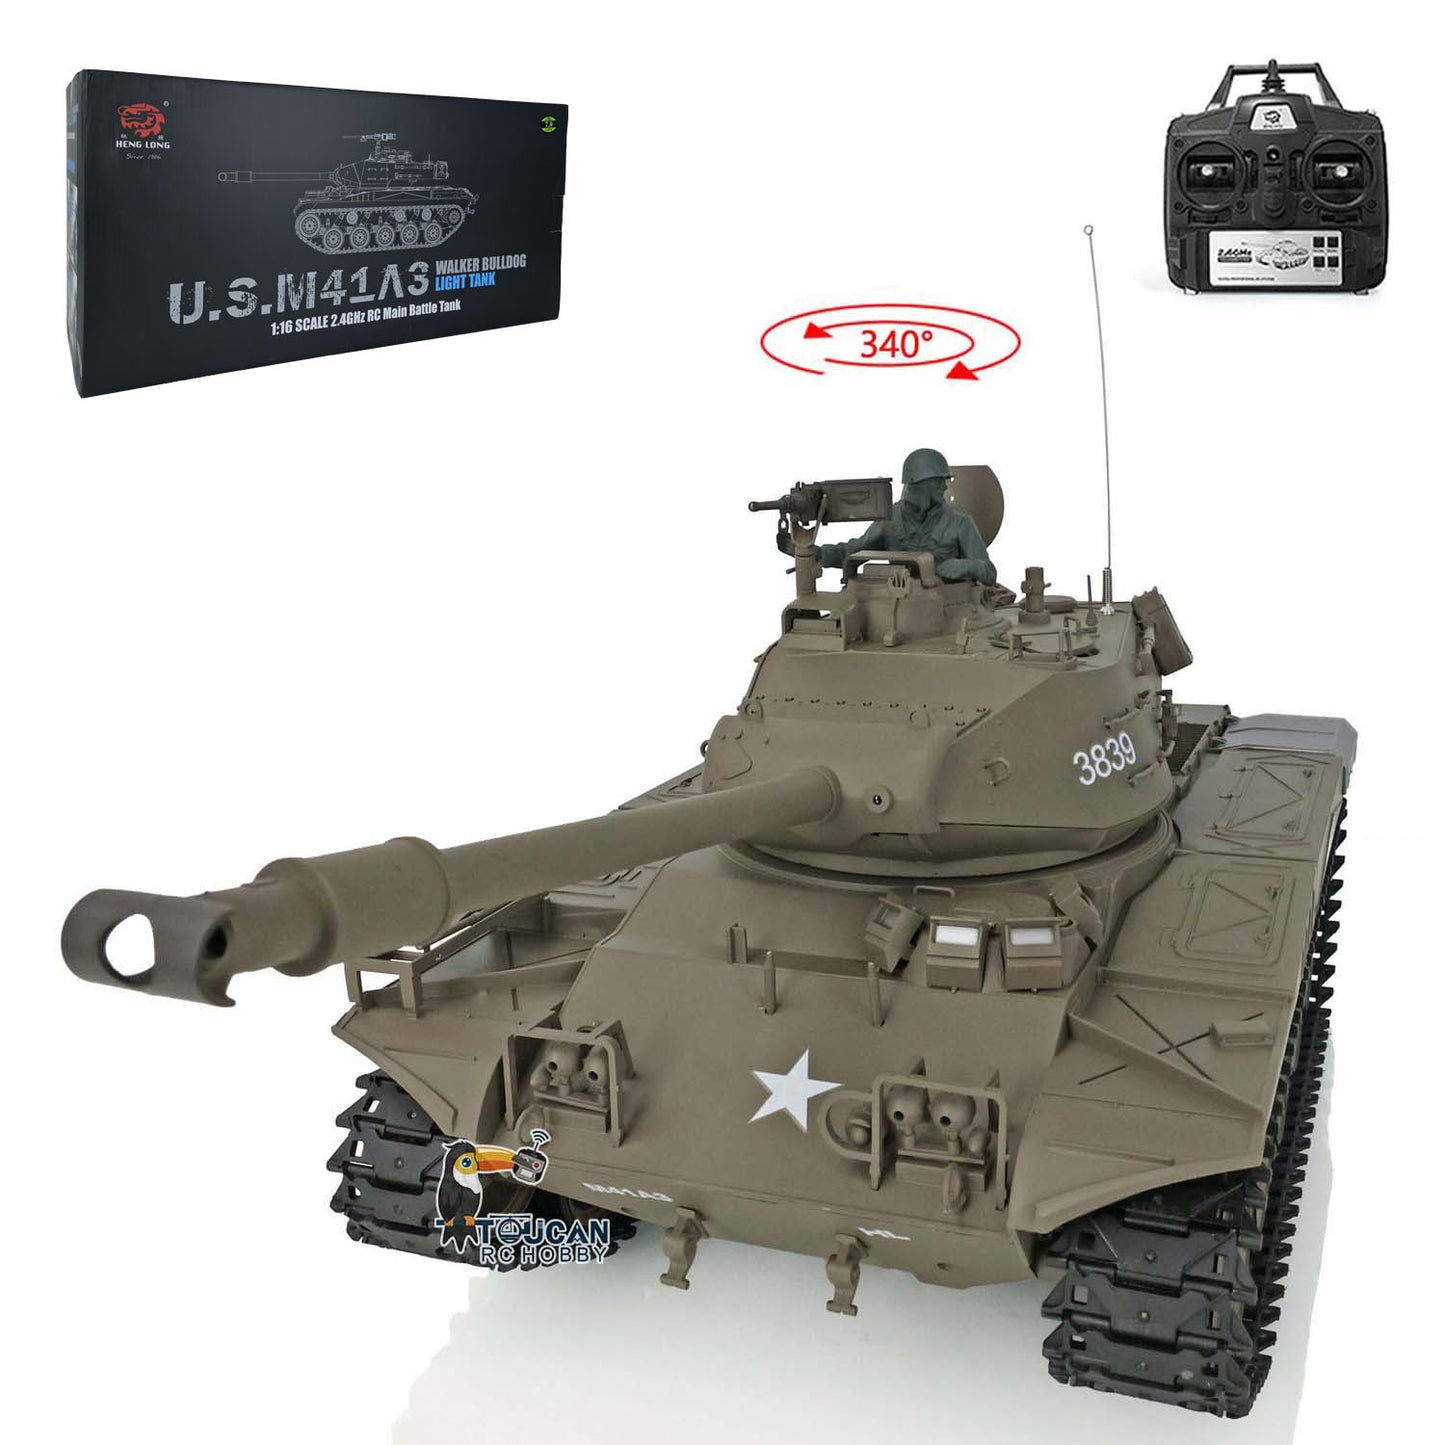 US Stock 2.4Ghz Henglong 1/16 Scale 7.0 Plastic Walker Bulldog RTR RC Tank Remote Control Panzer Military Model 3839 Infrared Combating